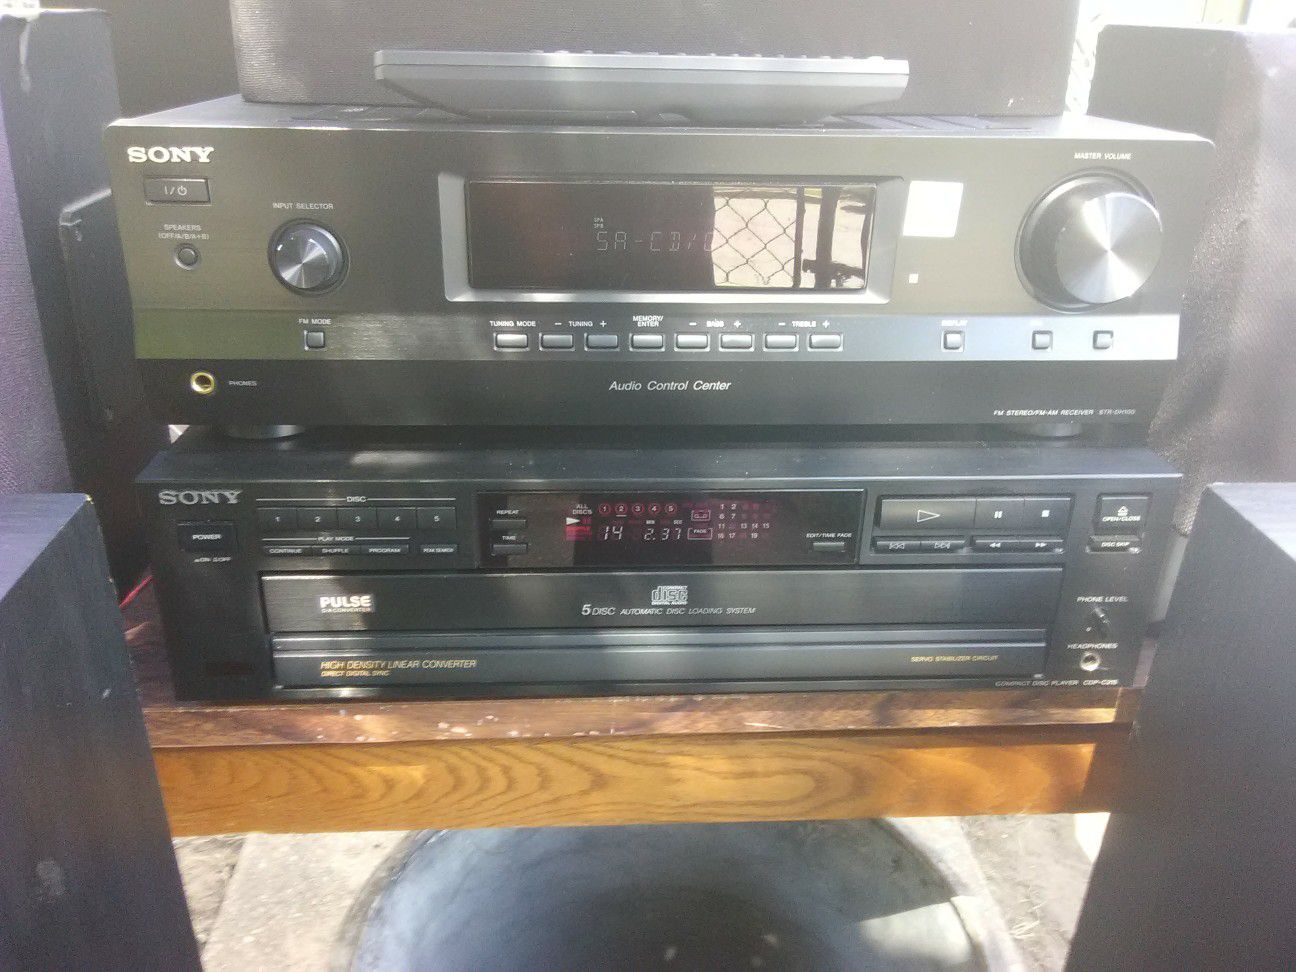 300 Watts Sony receiver with remote control and 5 disc CD player for $200 now in NE DC